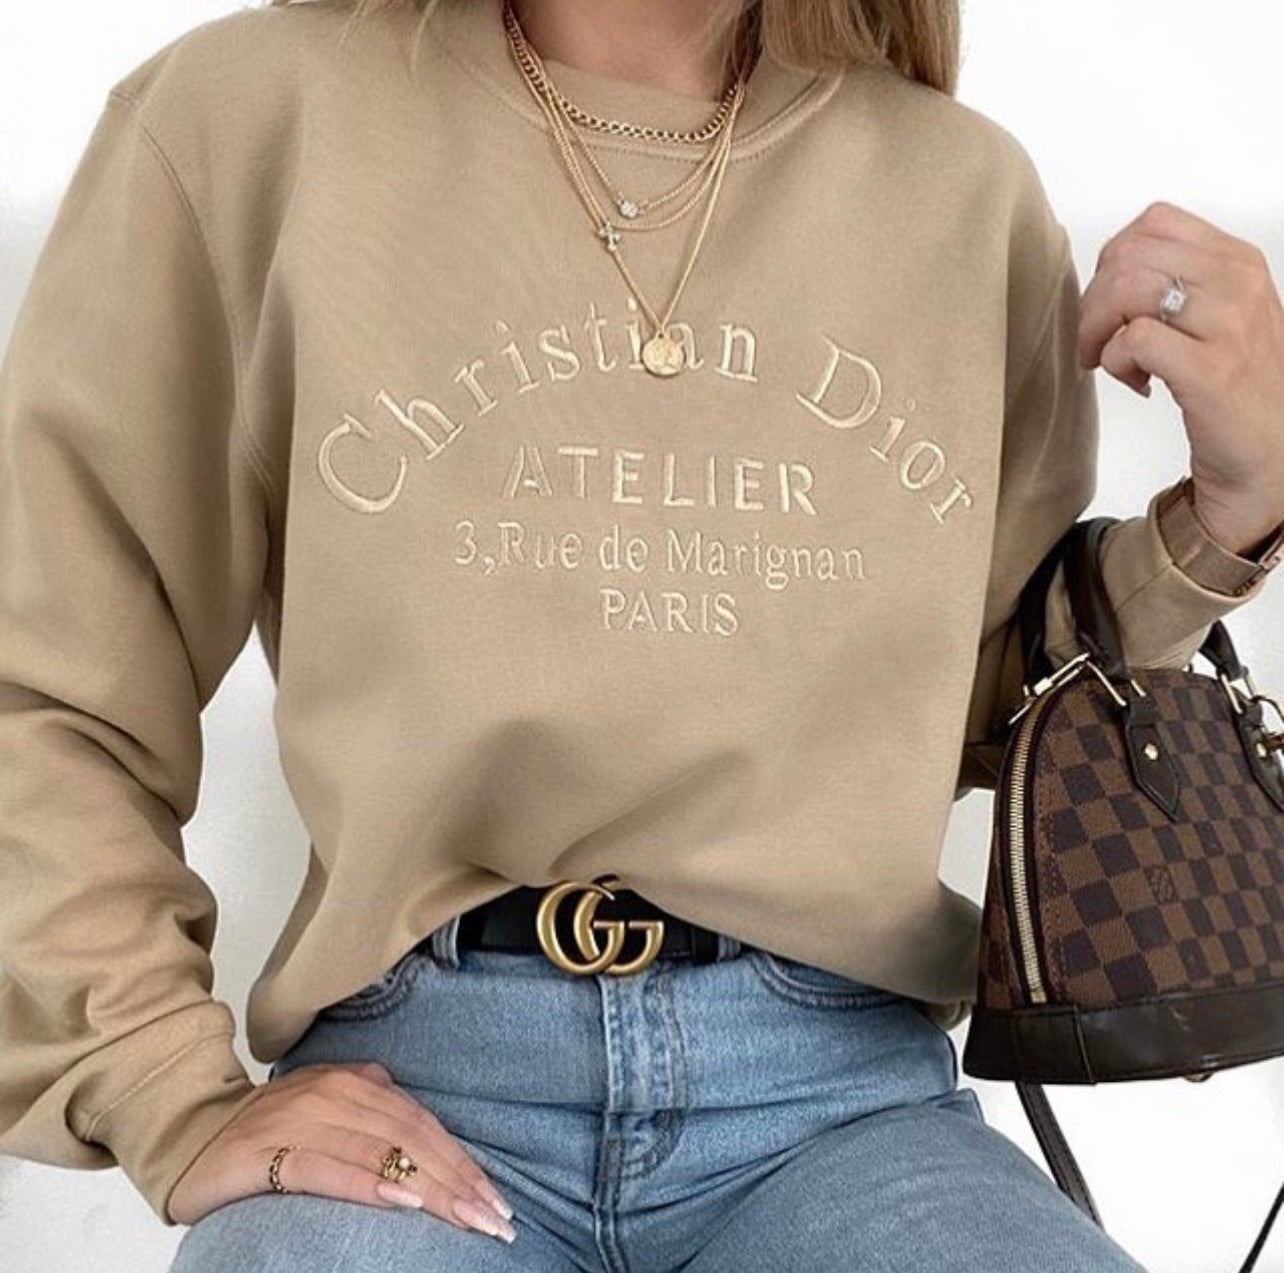 Atelier Embroidered Women's Sweatshirt - Out The Purse UK